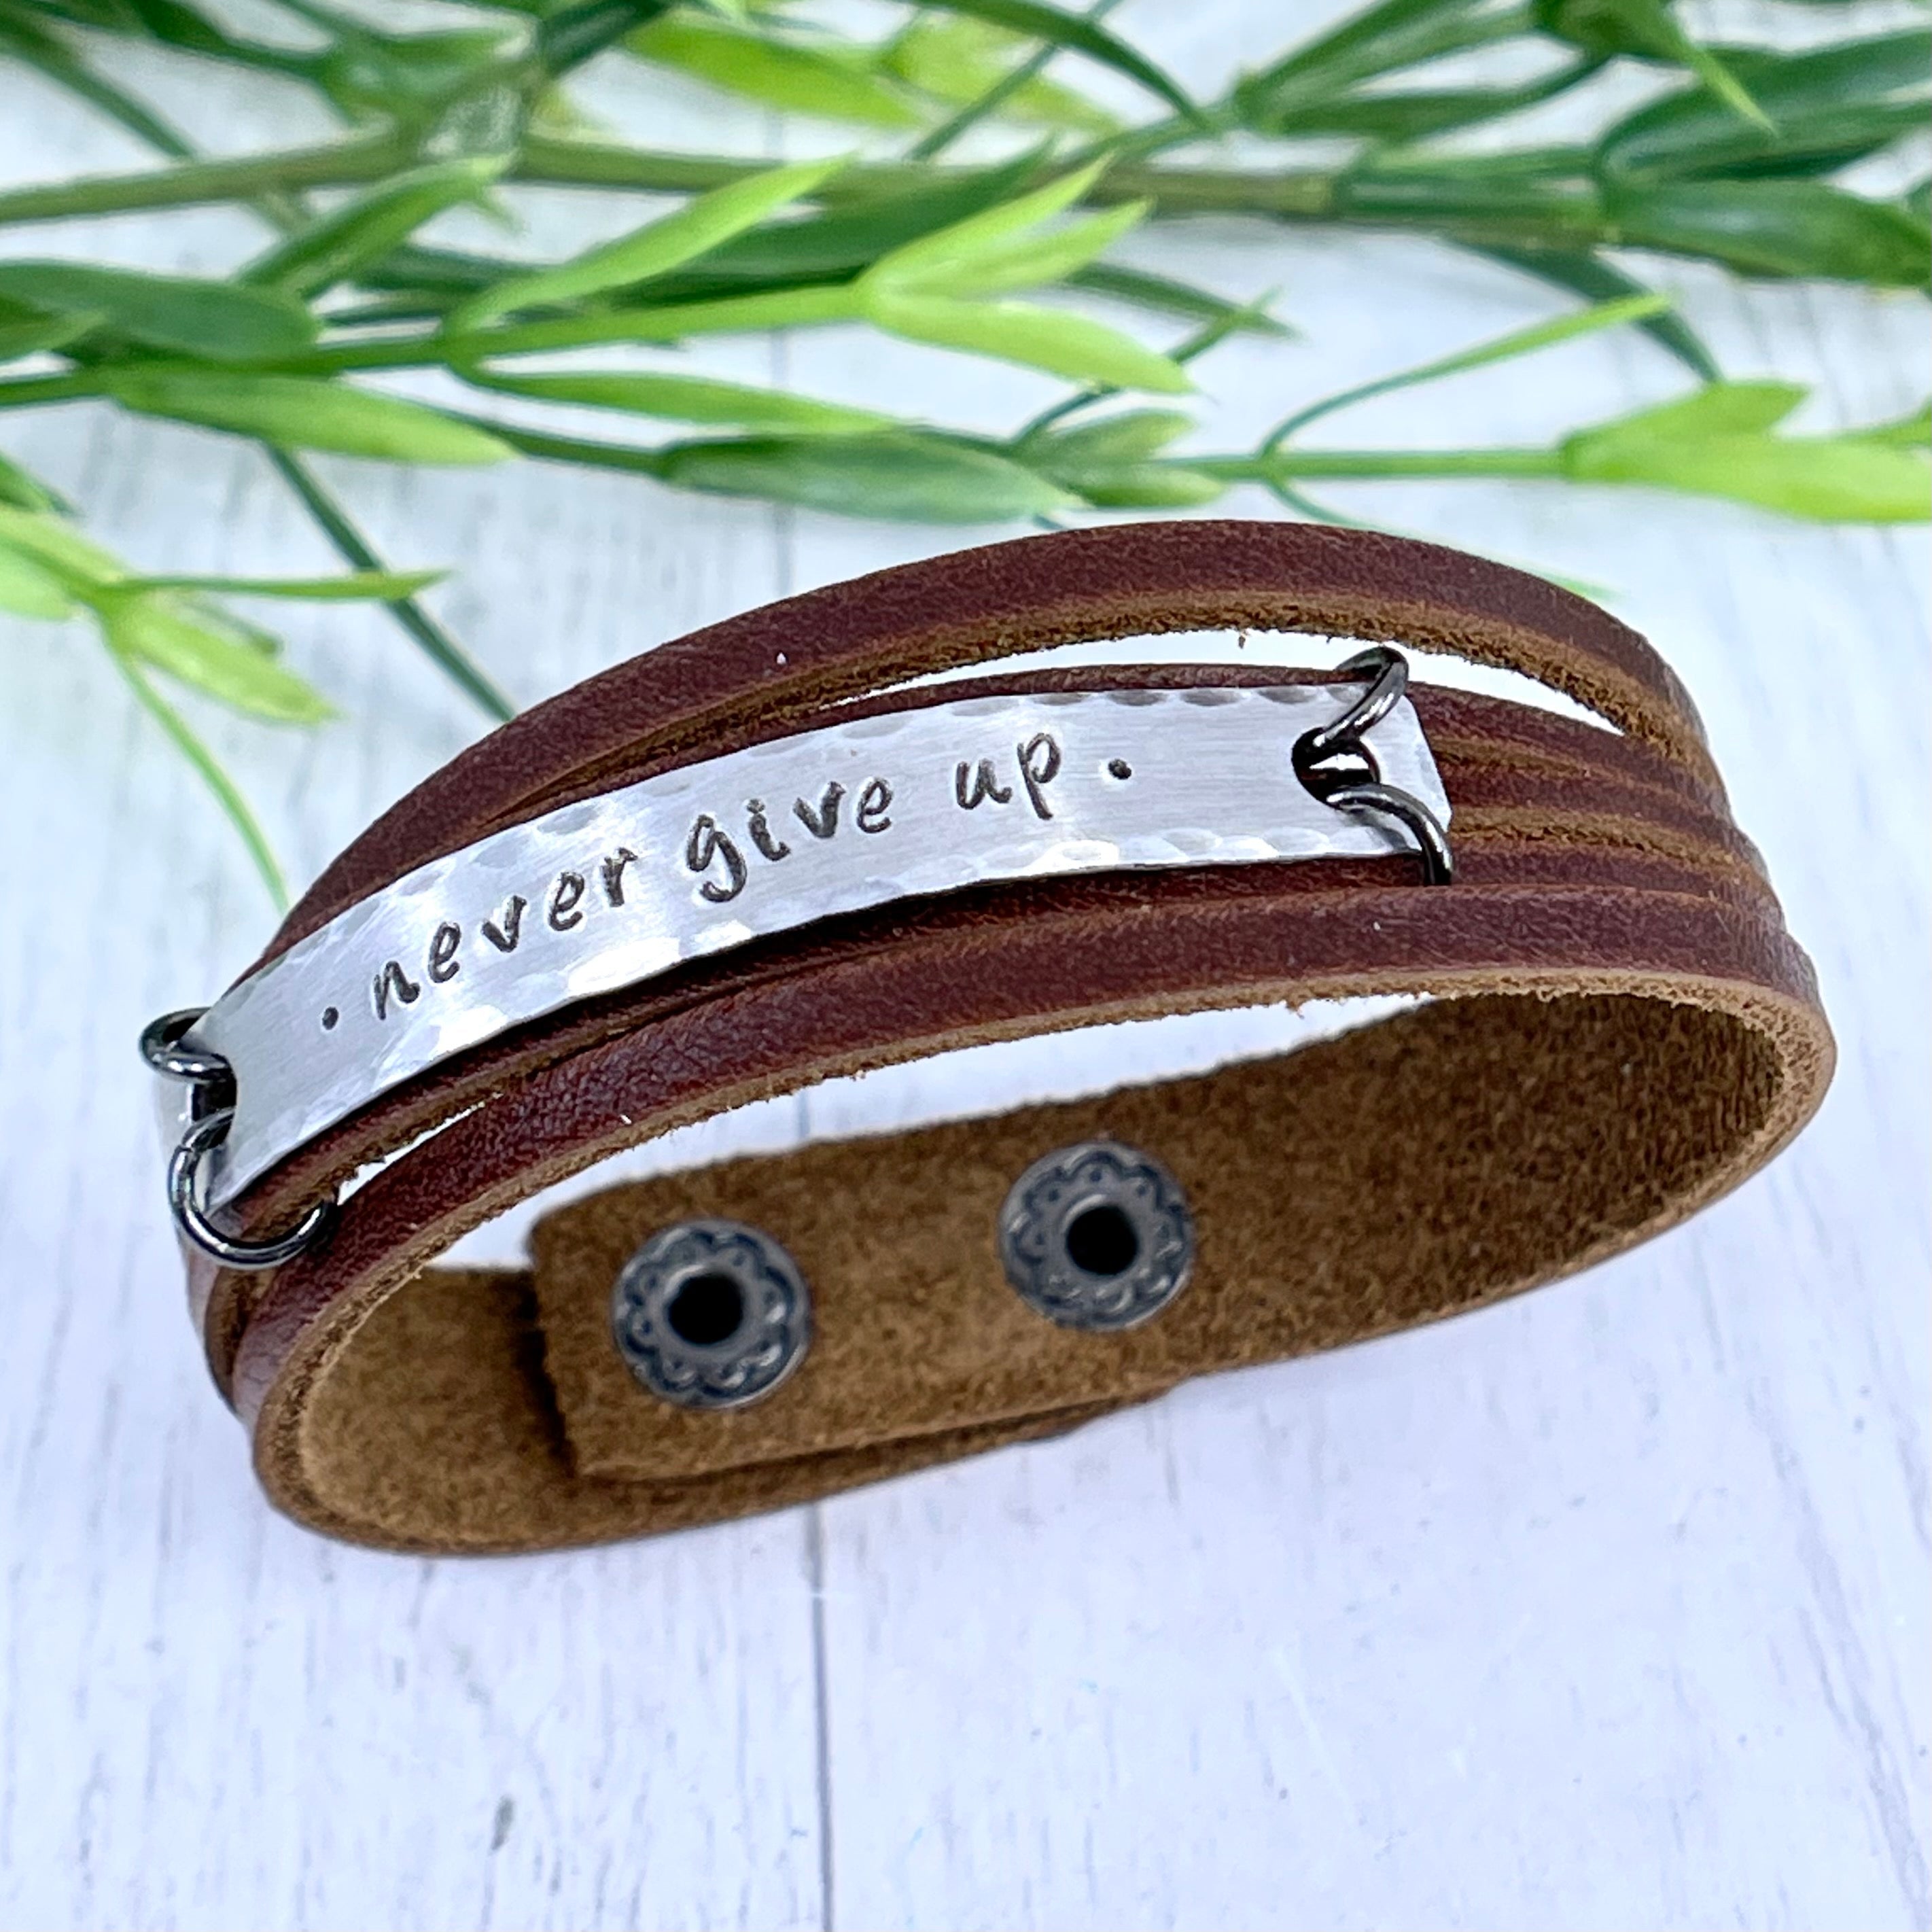 Natural Brown NEVER GIVE UP Mini Leather Wrap Bracelet | Women Teens | Adjustable Leather Wrap Create Hope Cuffs 